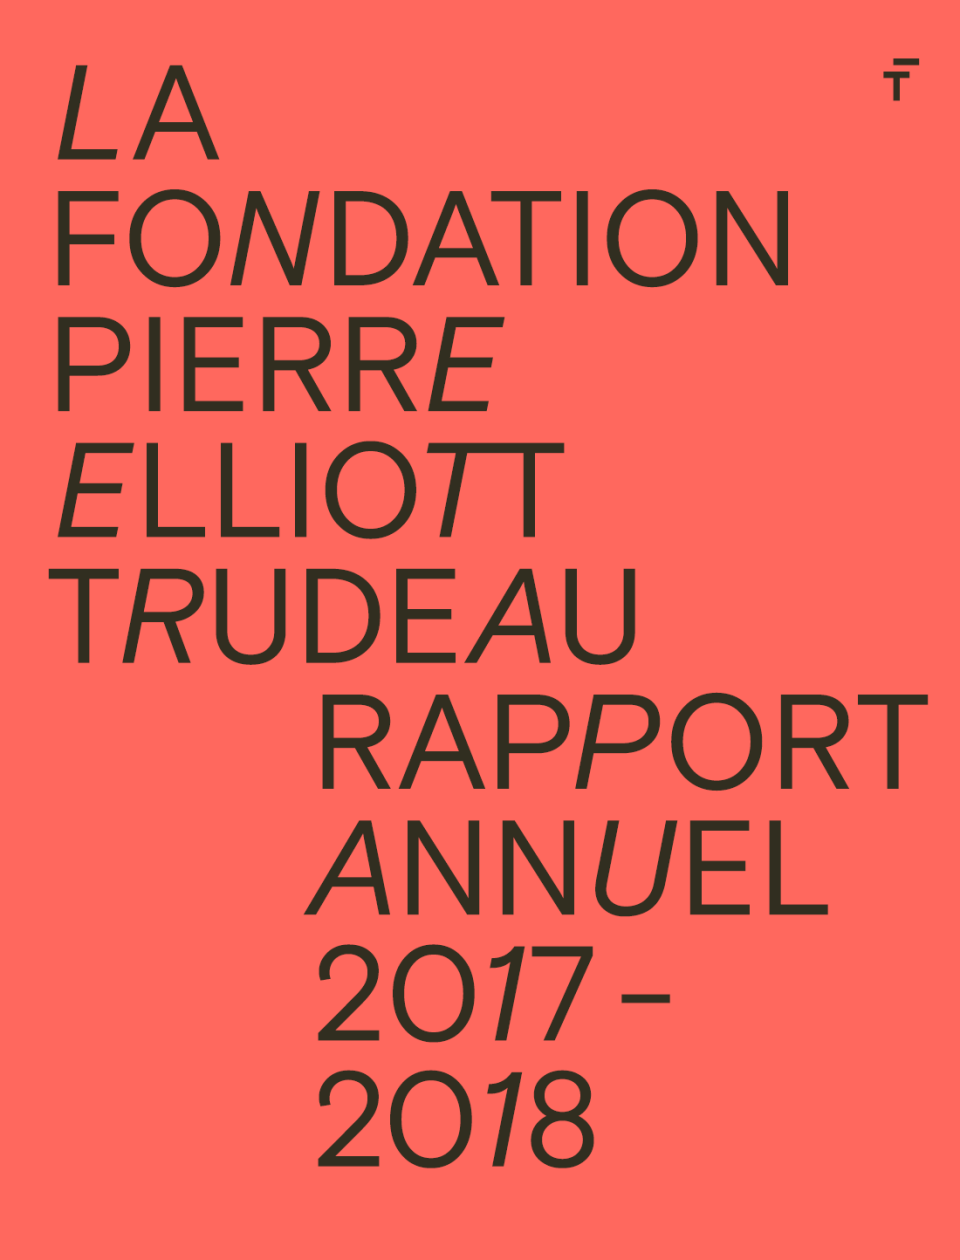 2017-2018 rapport annuel